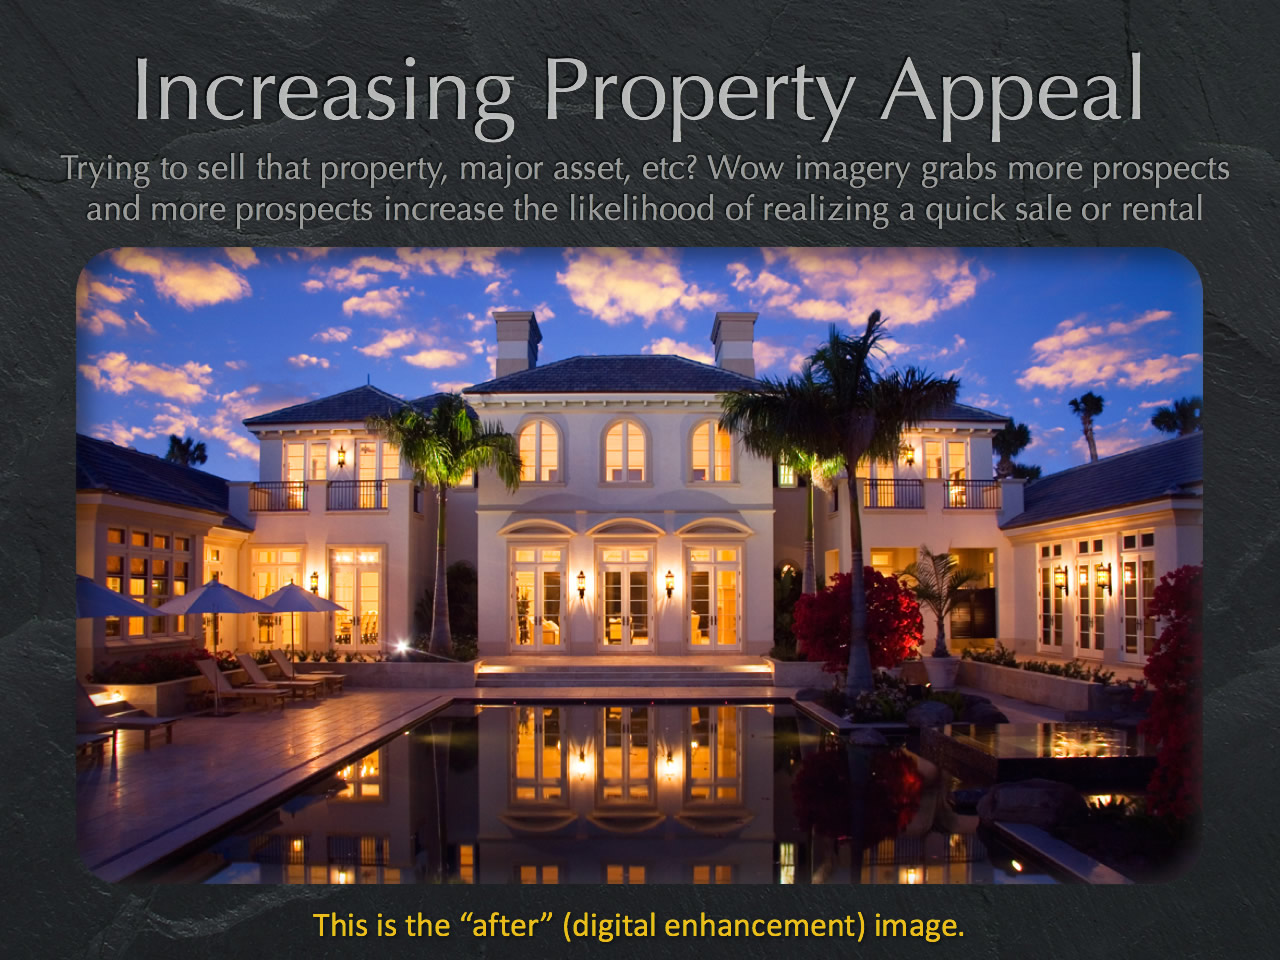 Realtors want to present every listing as attractively as possible